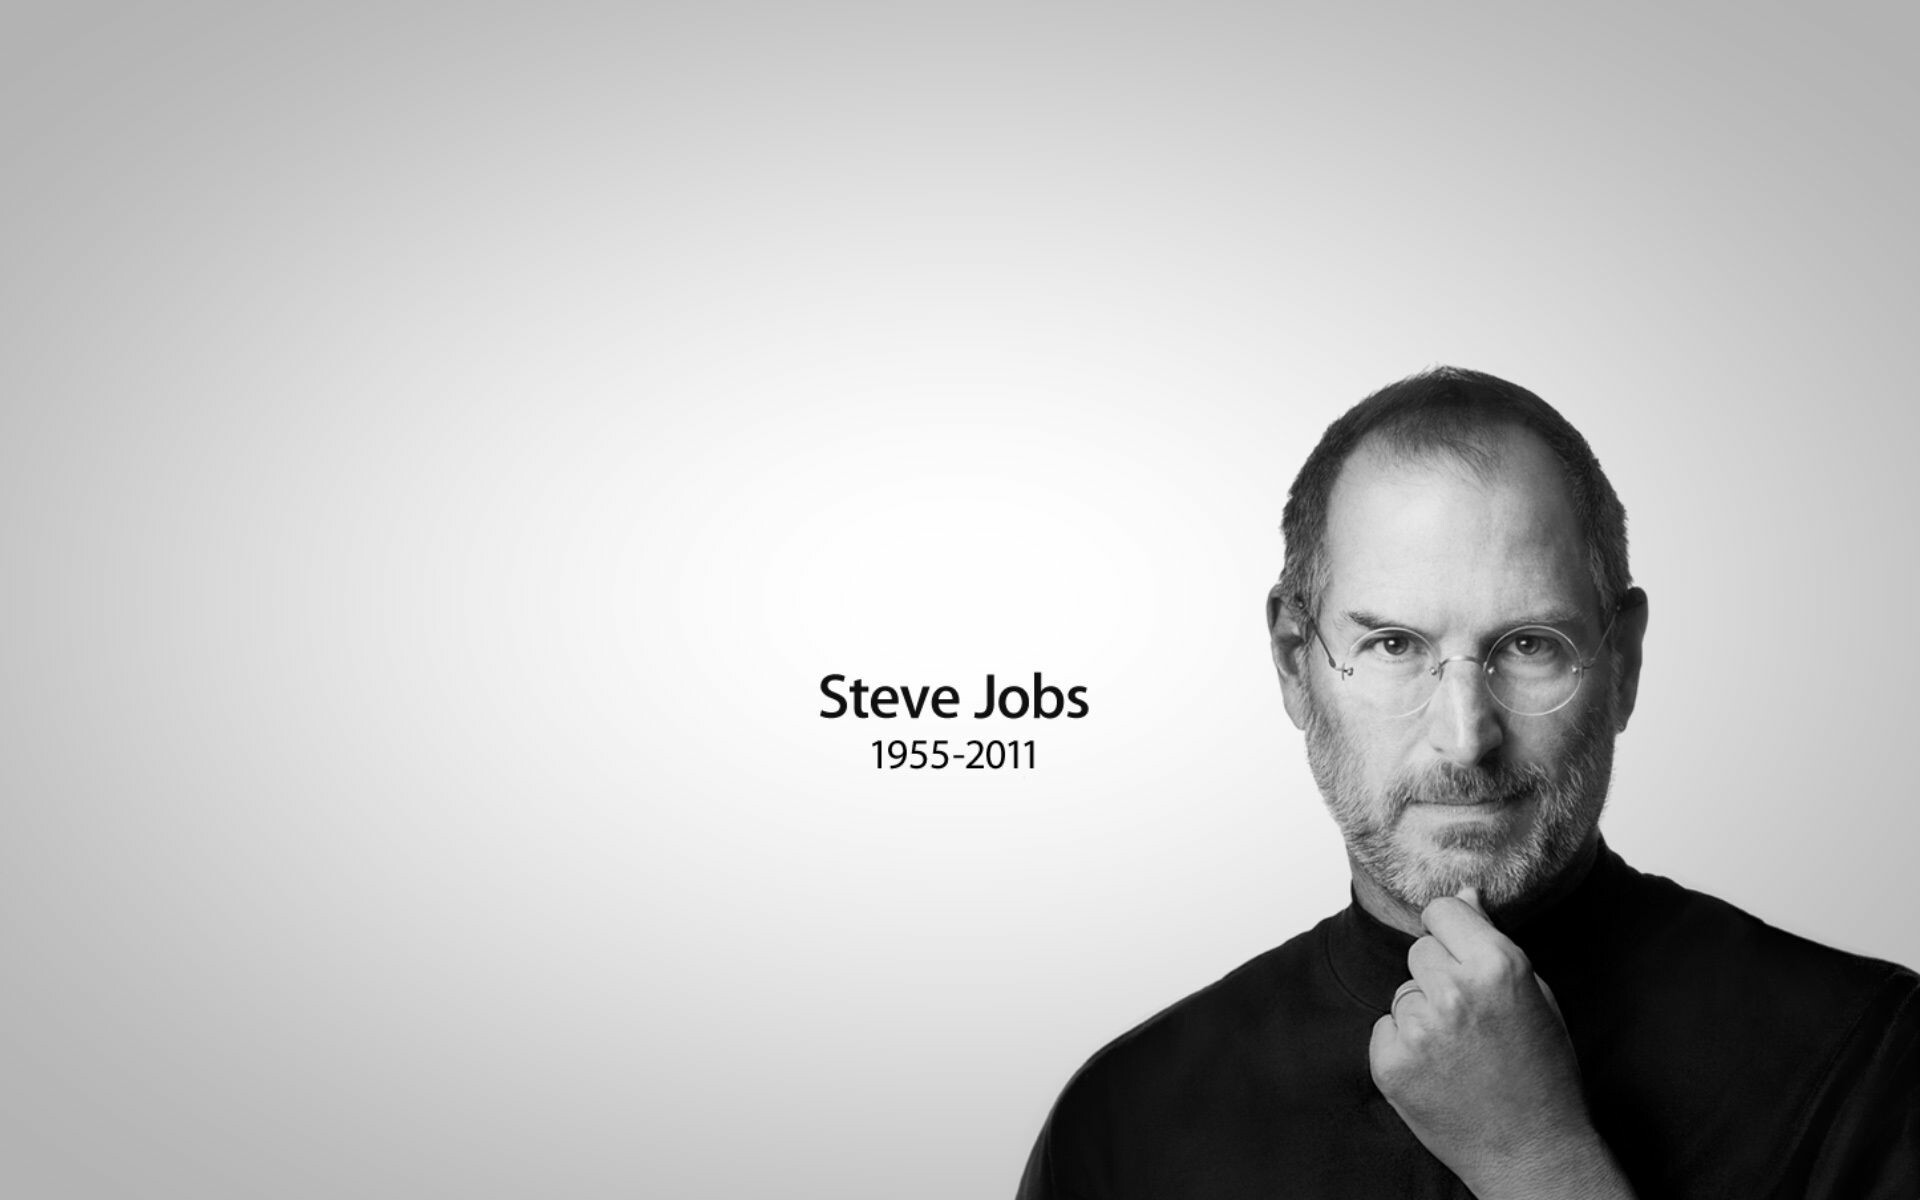 Steve Jobs: The co-founder and CEO of Apple, Founded NeXT and was the majority shareholder of Pixar. 1920x1200 HD Wallpaper.